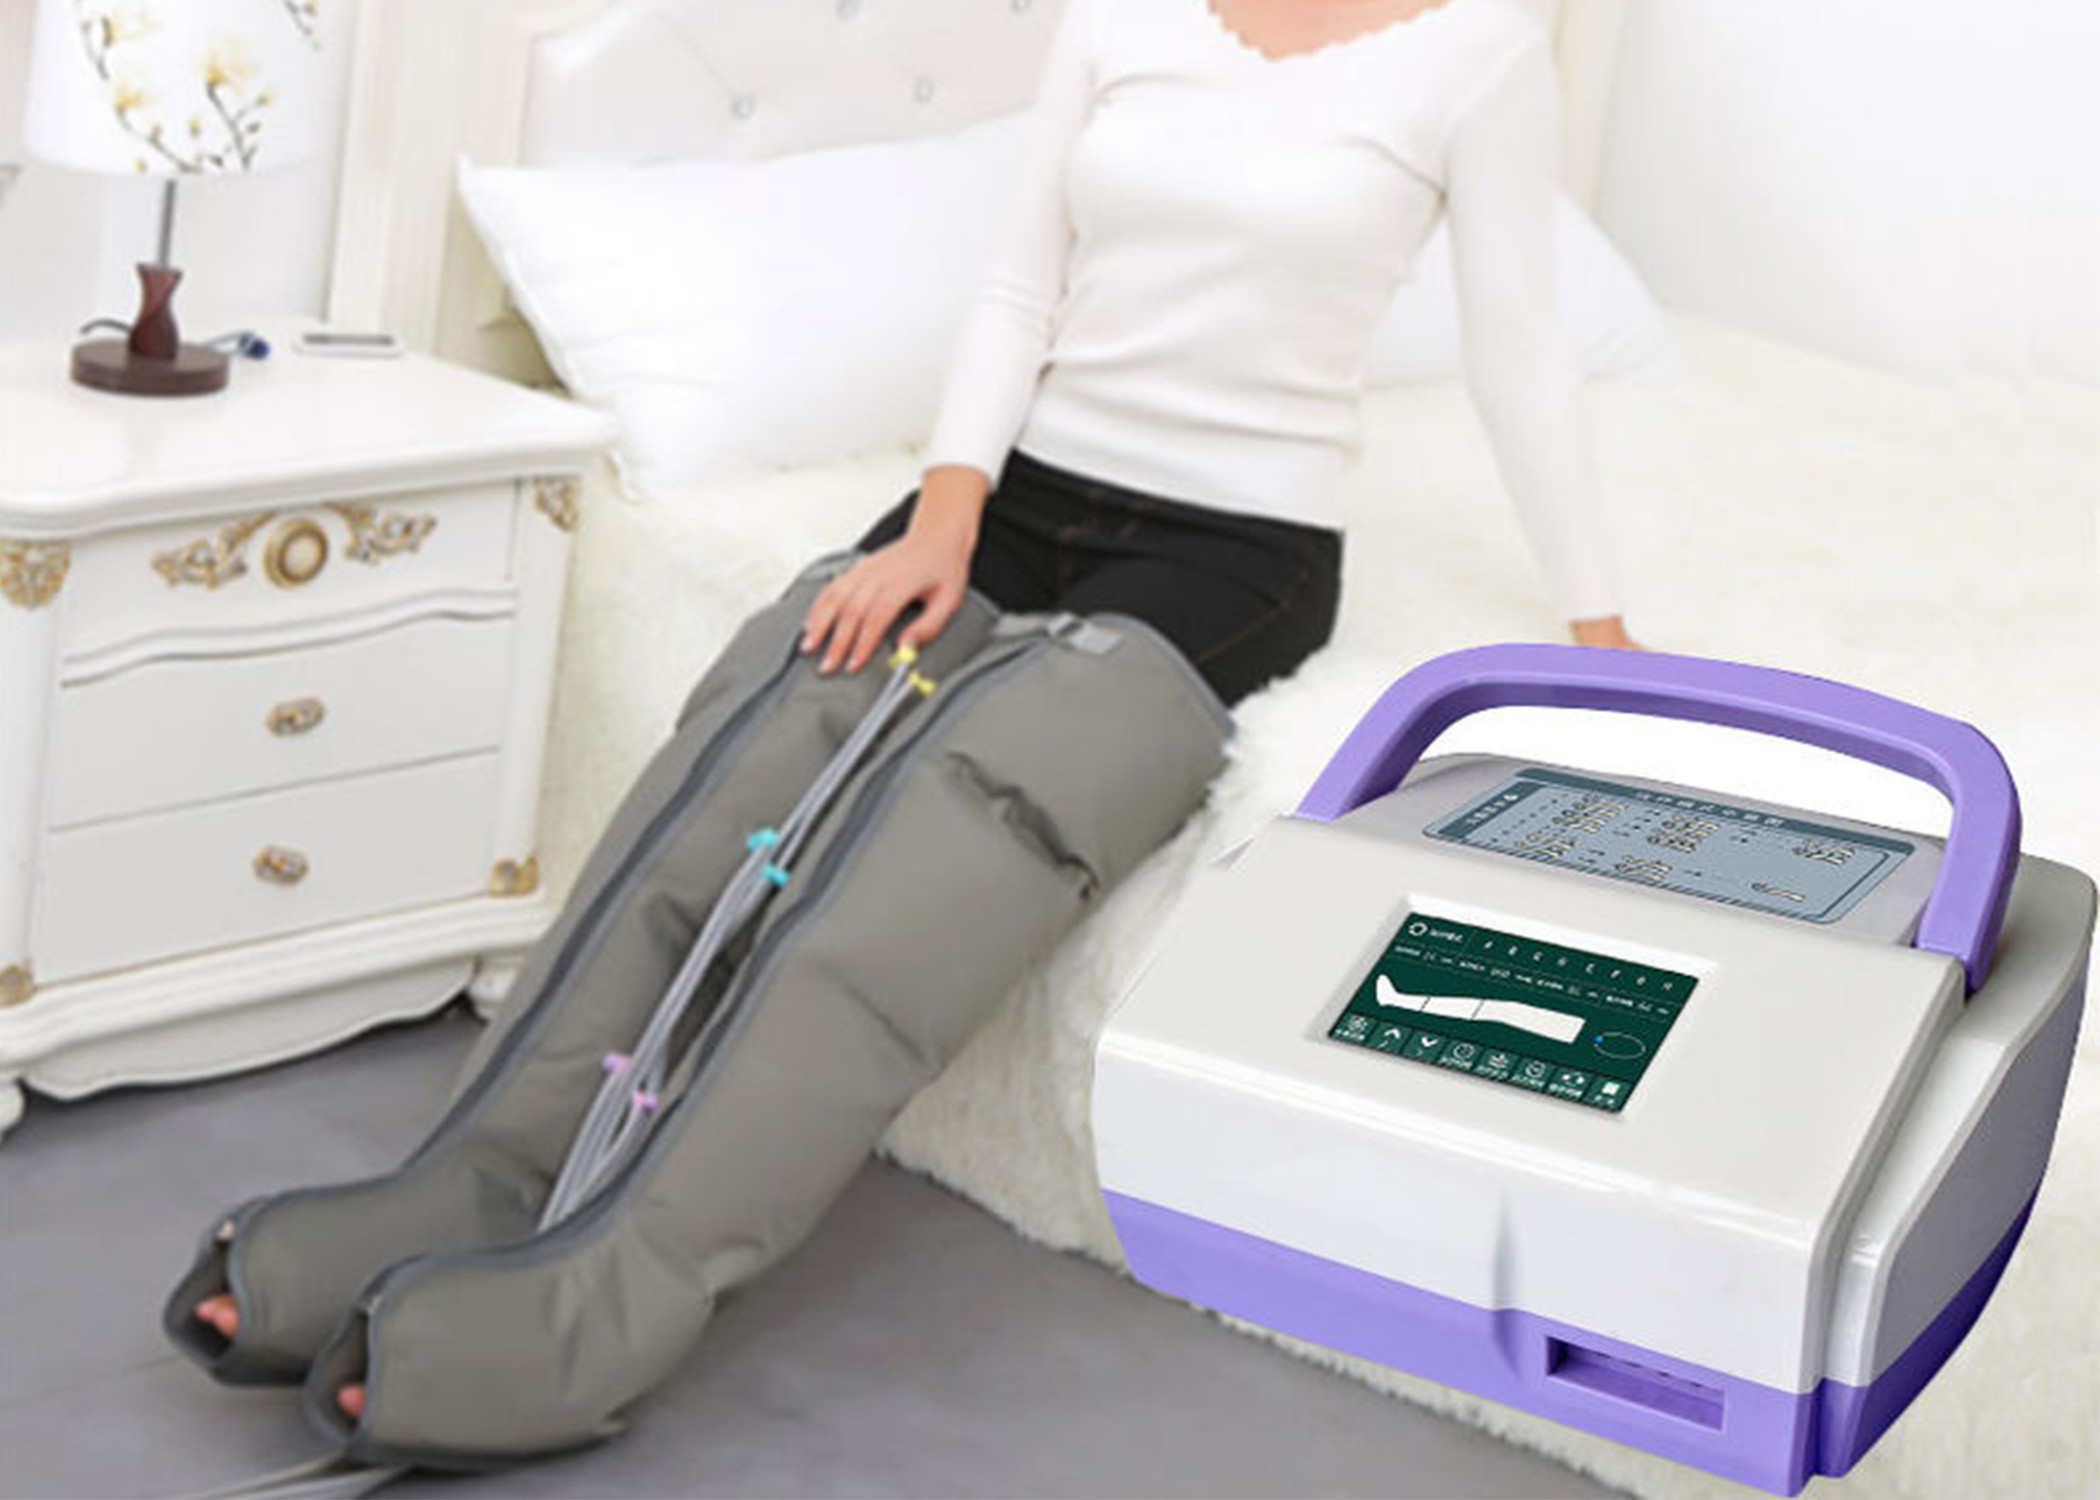 China Sequential Inflatable Leg Massager , Blood Circulation Long Boot Air Massager wholesale